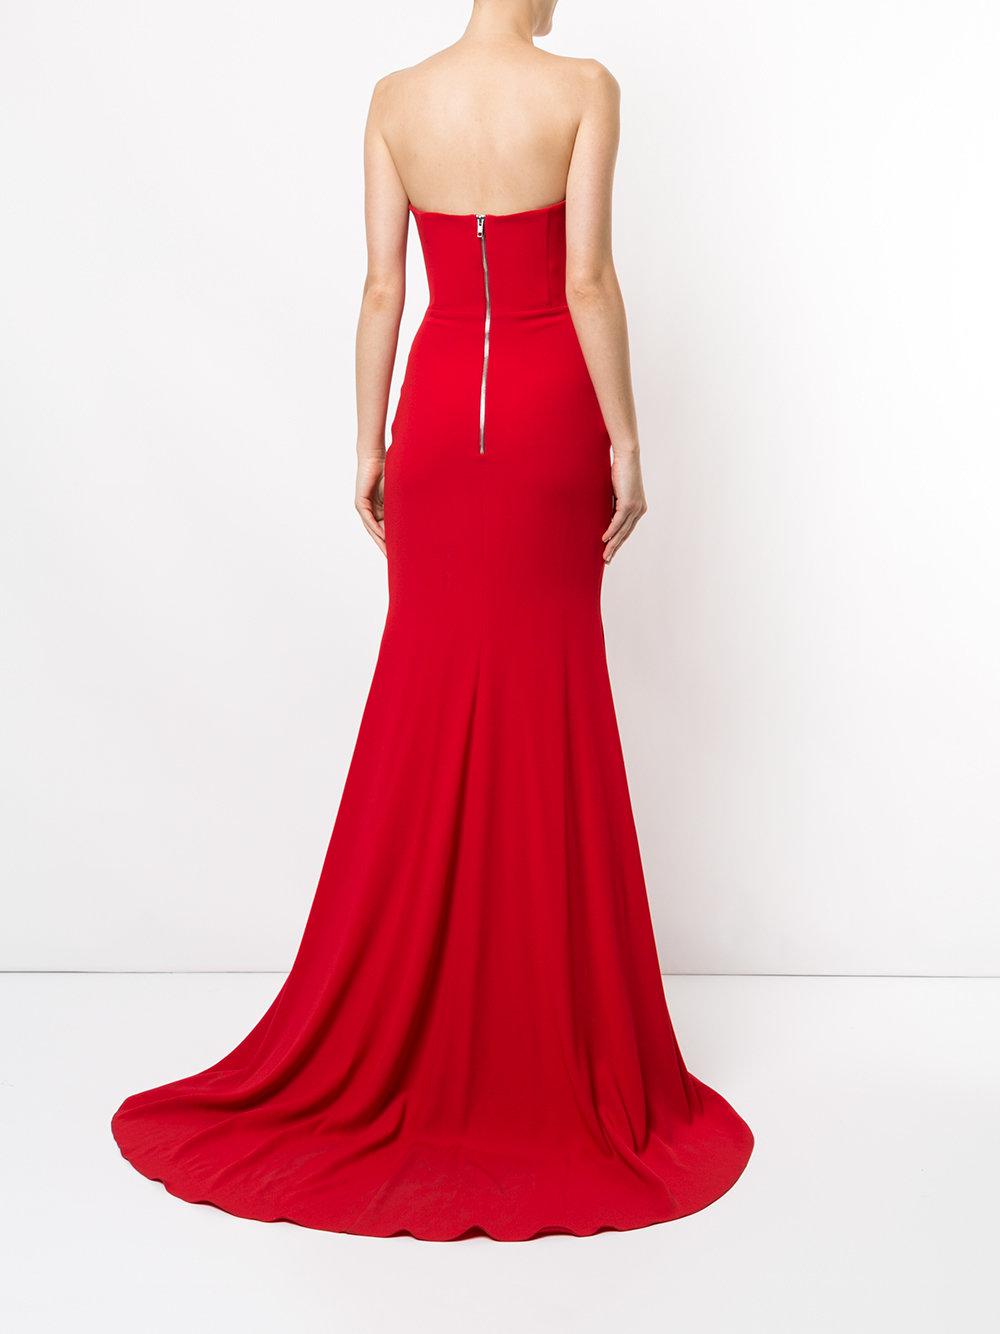 Alex Perry Synthetic Alex Strapless Drape Gown in Red - Lyst